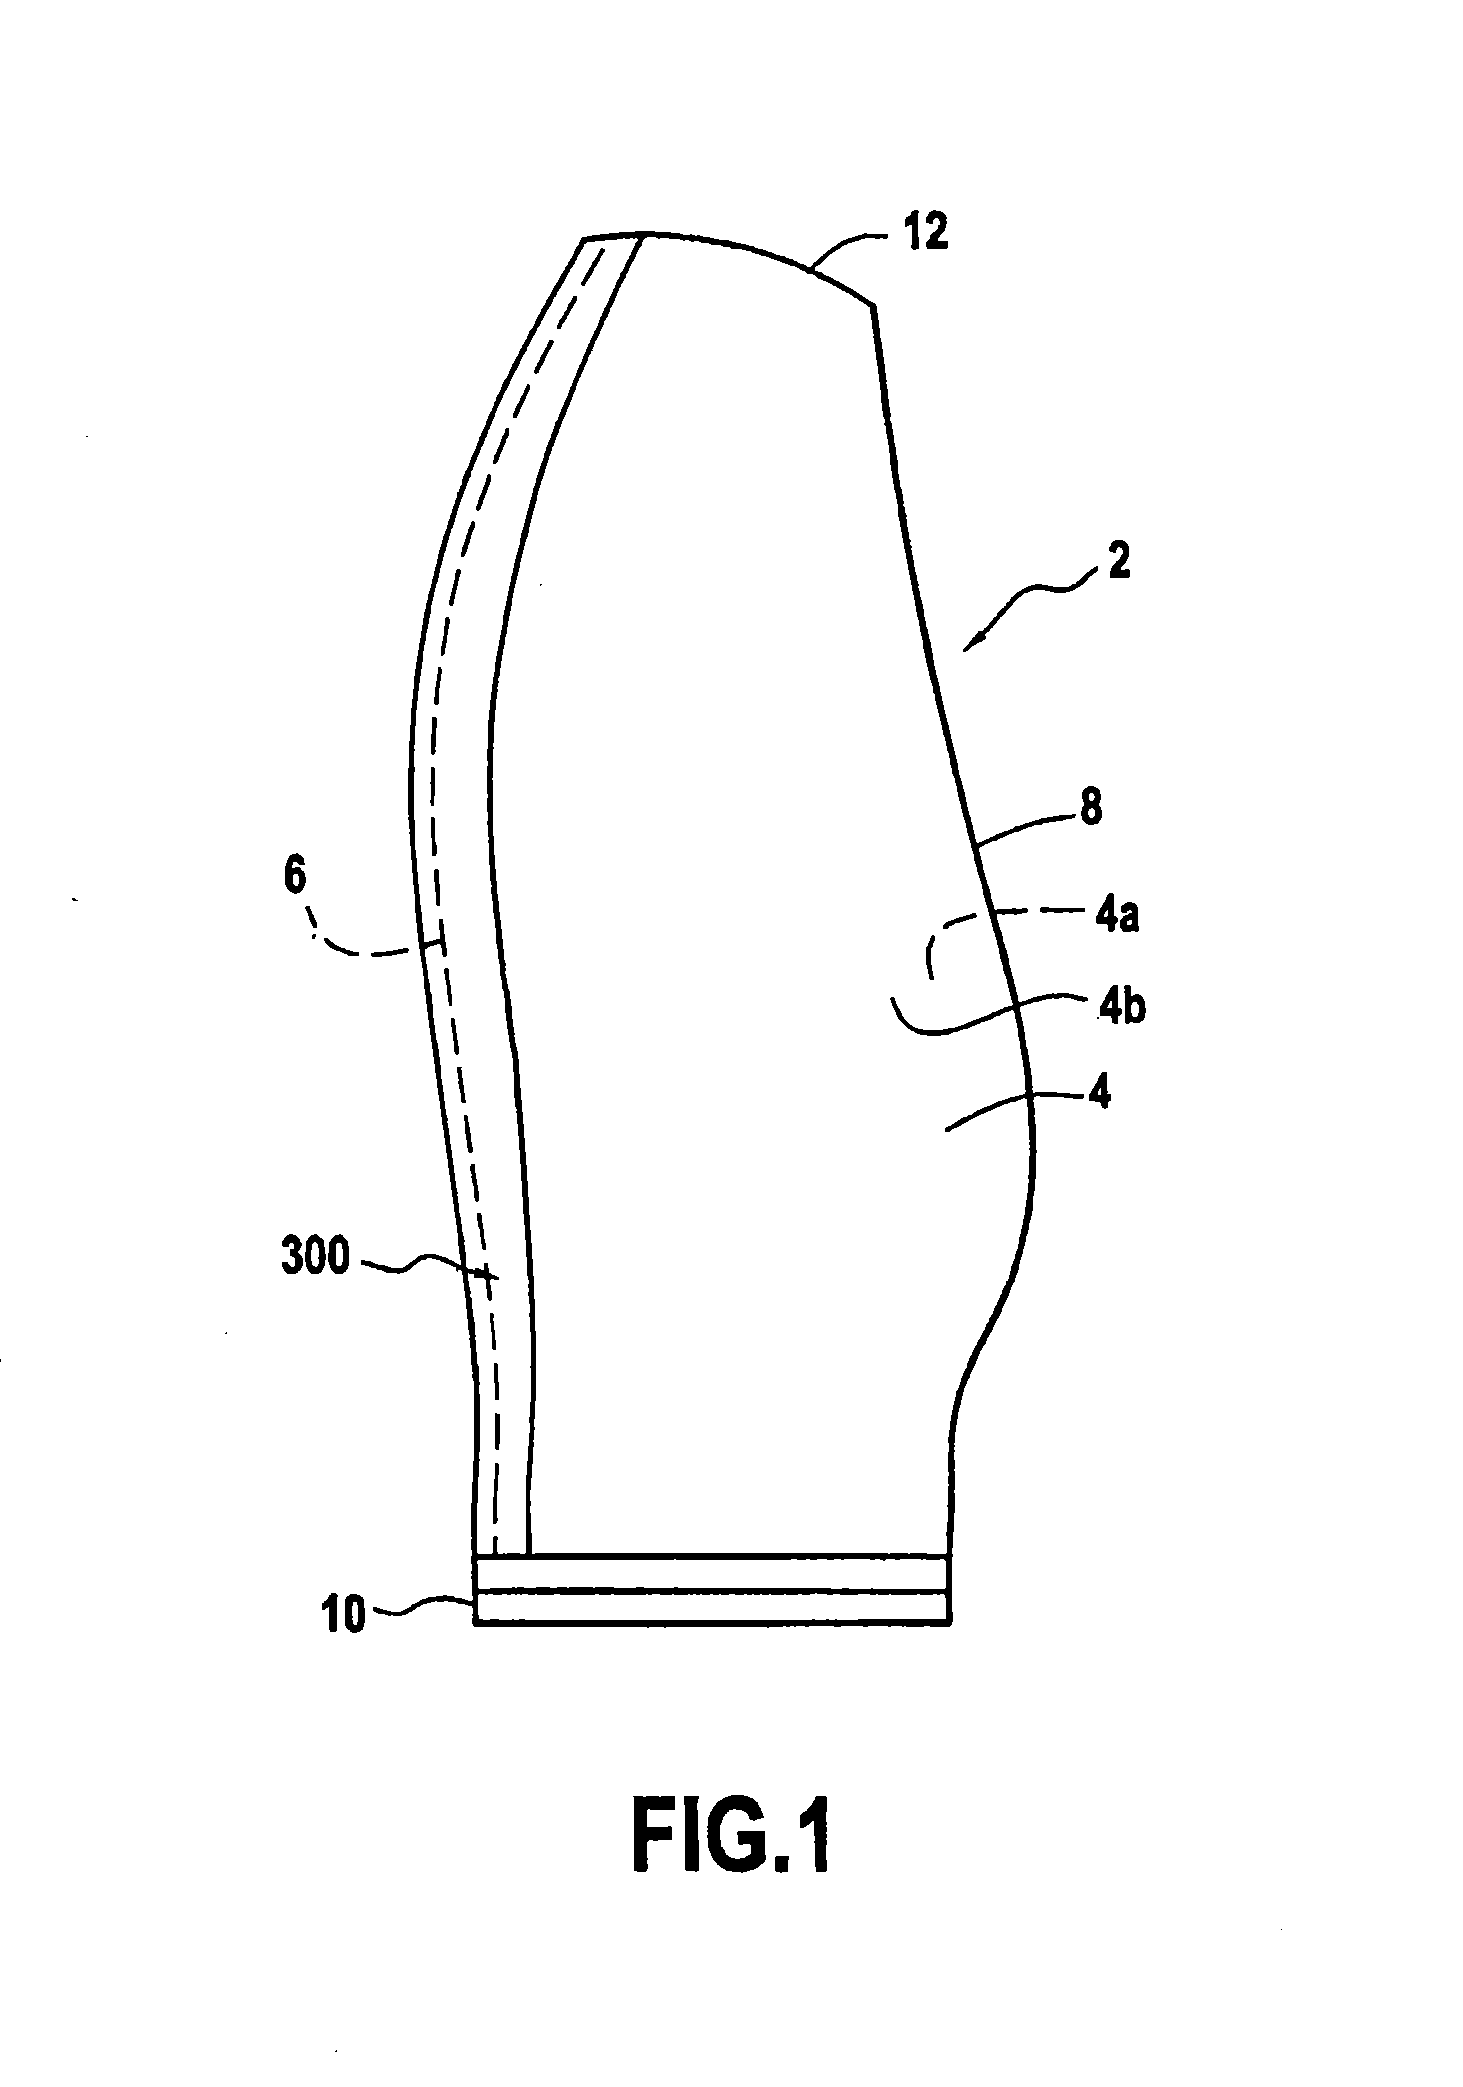 Tooling for fastening metal reinforcement on the leading edge of a turbine engine blade, and a method using such tooling